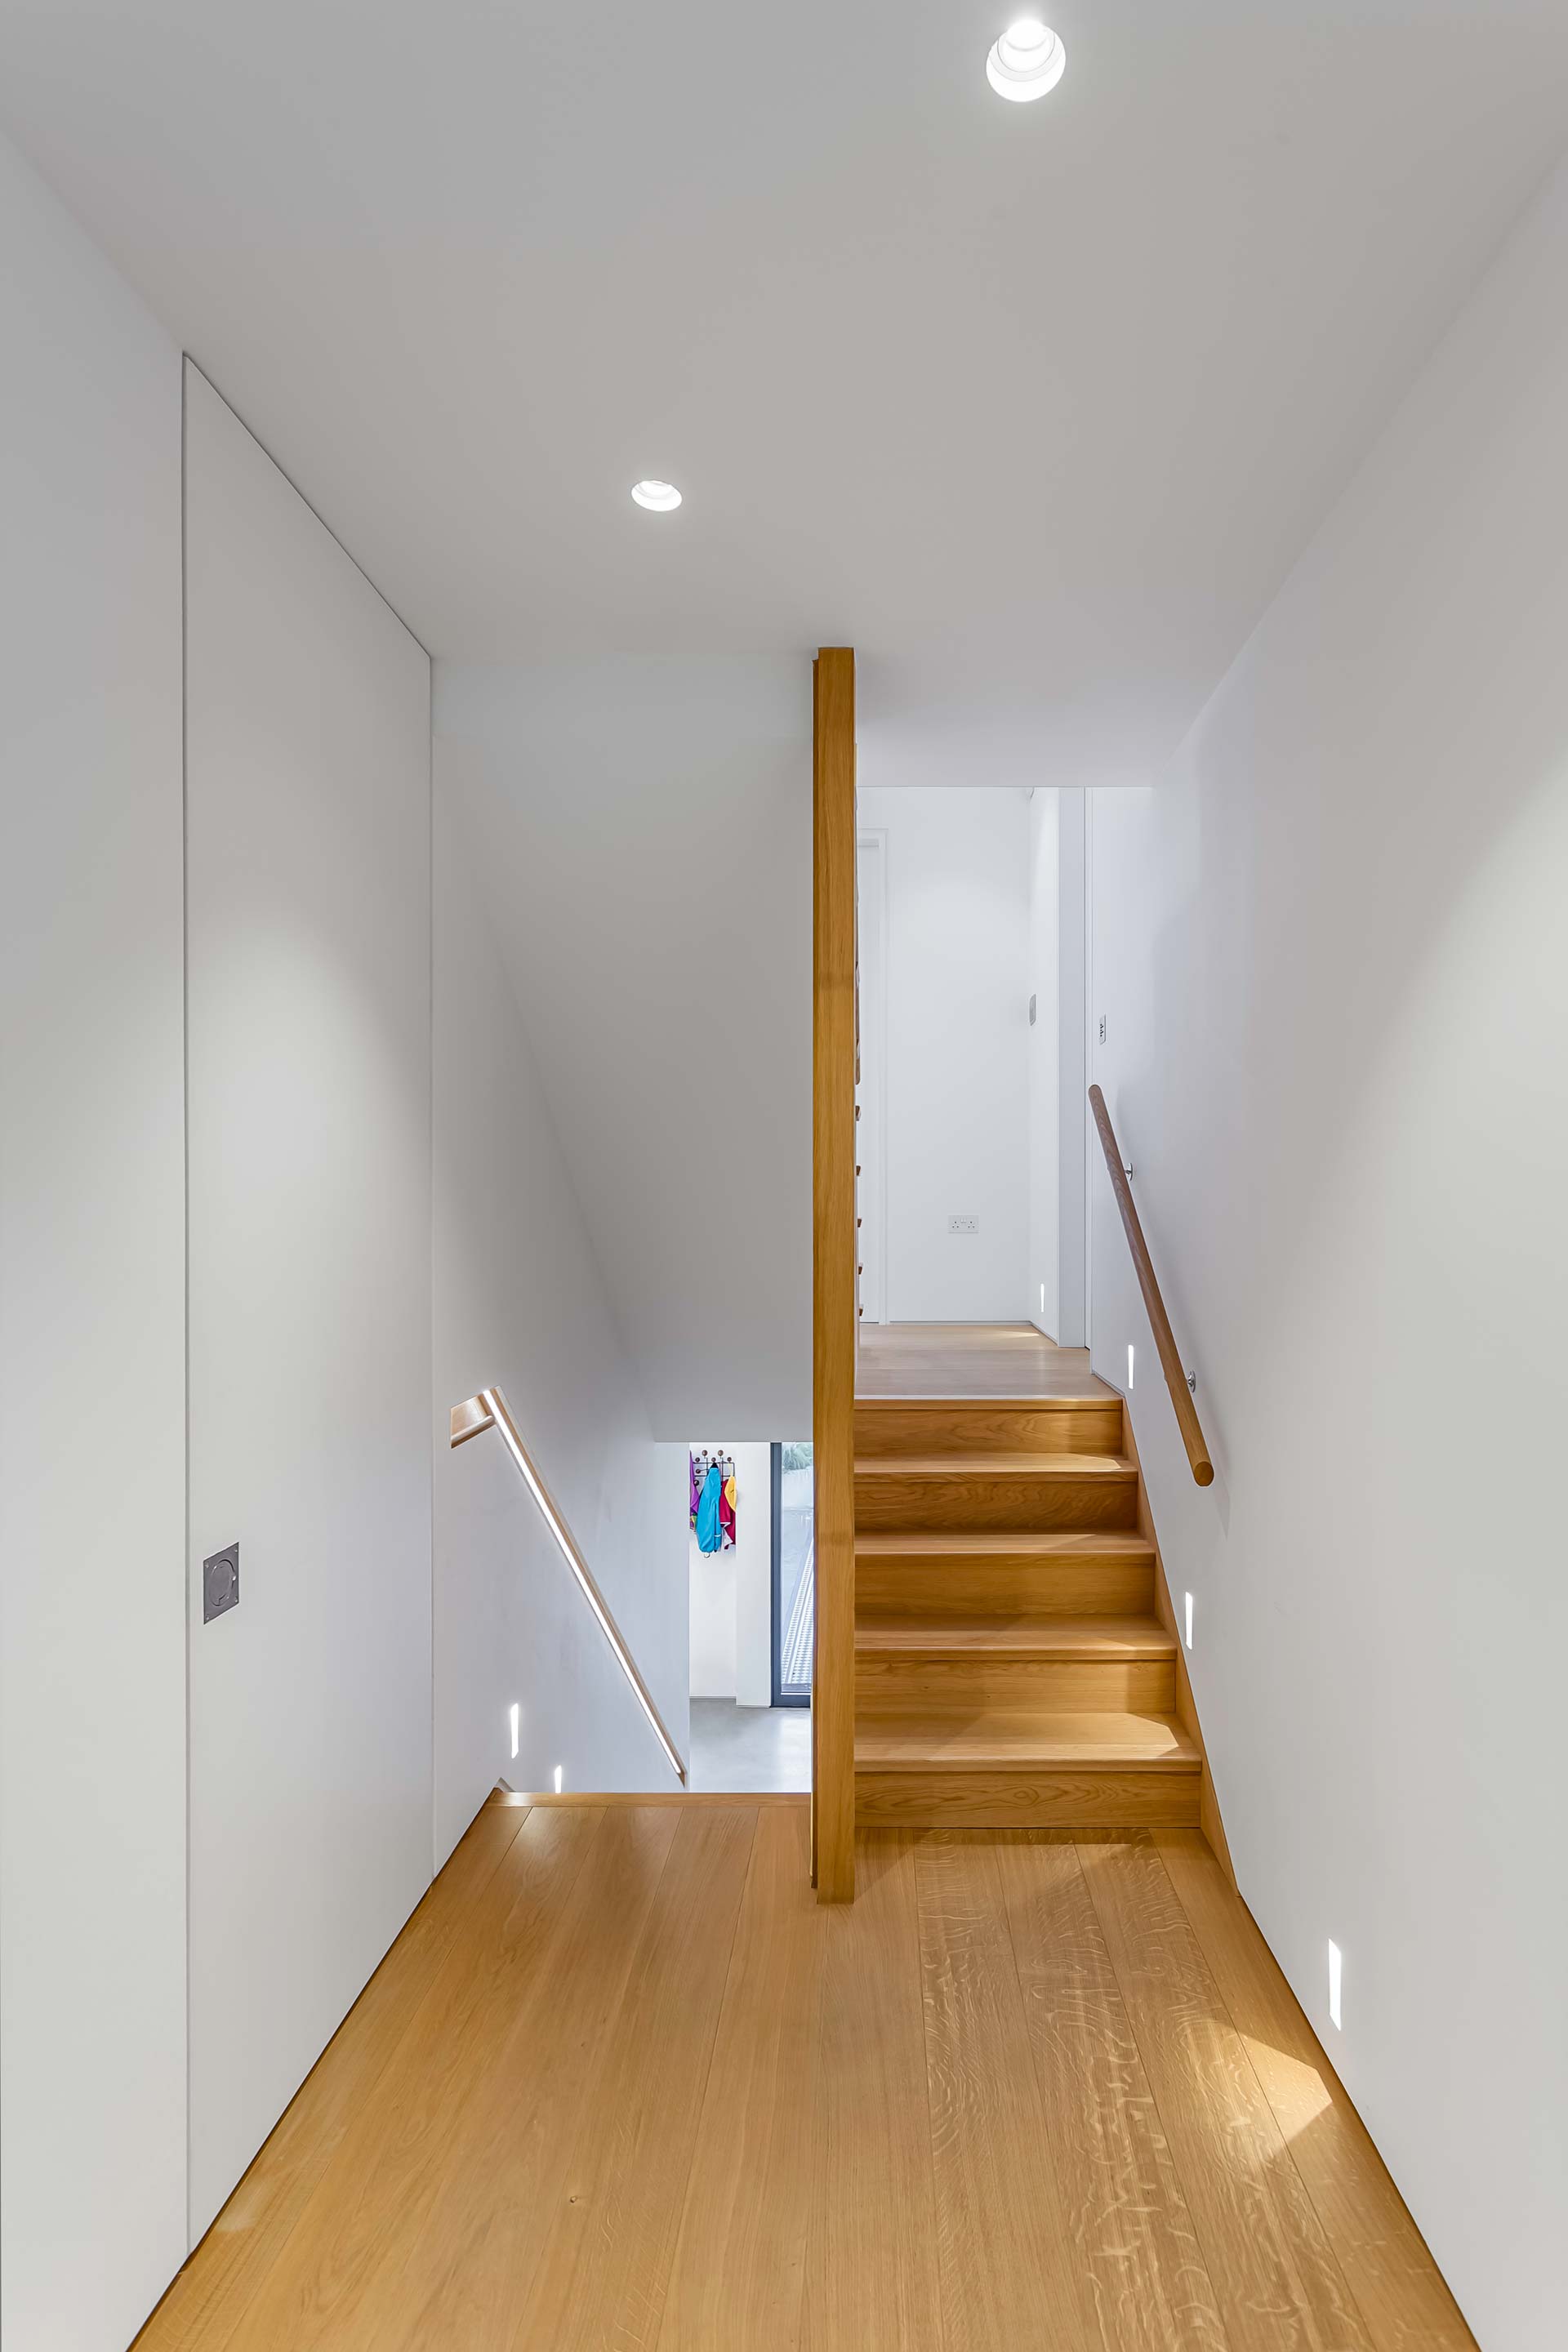 Helix Gardens Brixton Full Renovation And Extension With New Basement 08